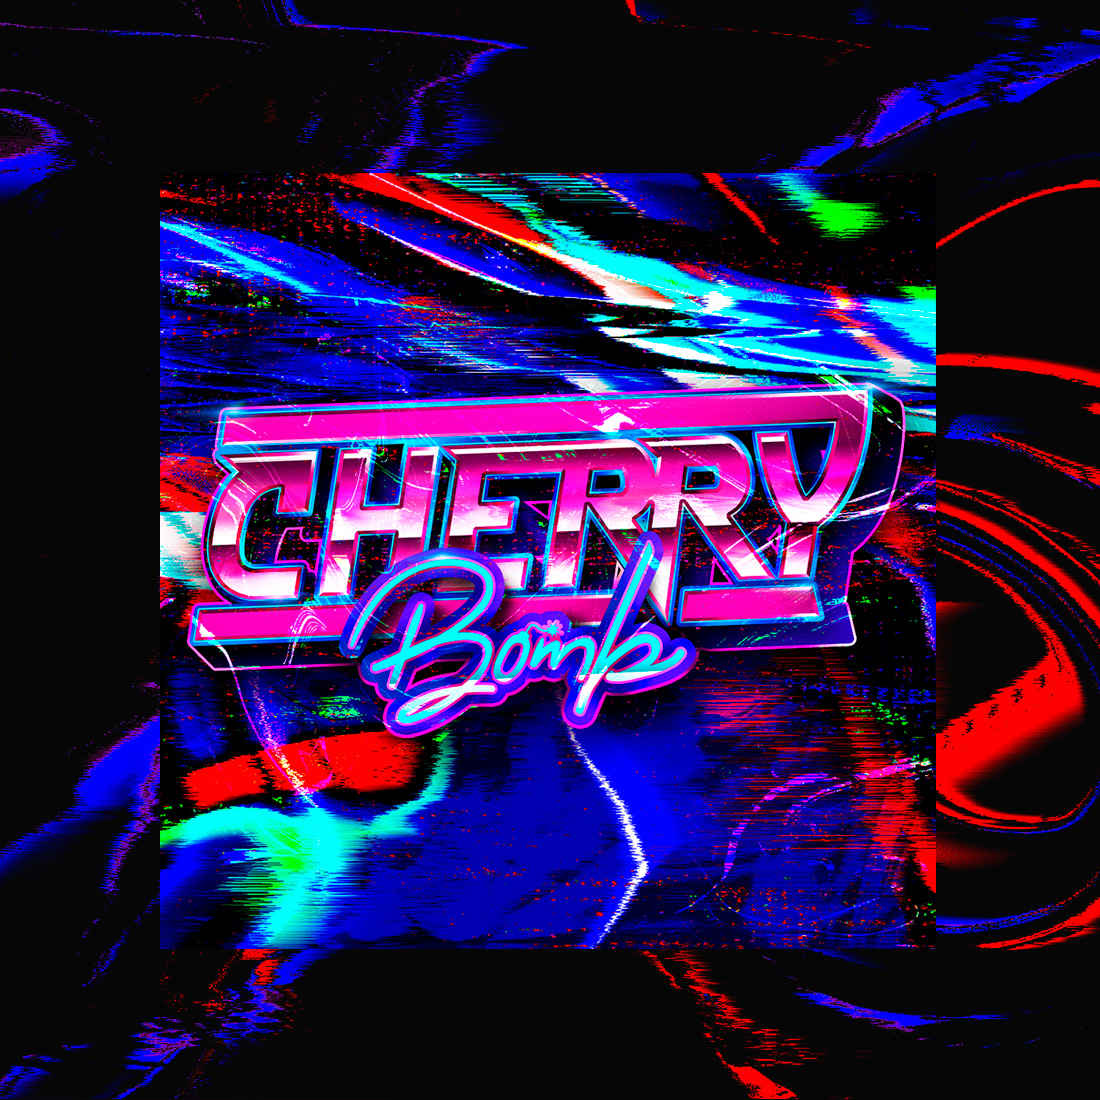 Cherrry Glitch and Liquid Textures Preview image.